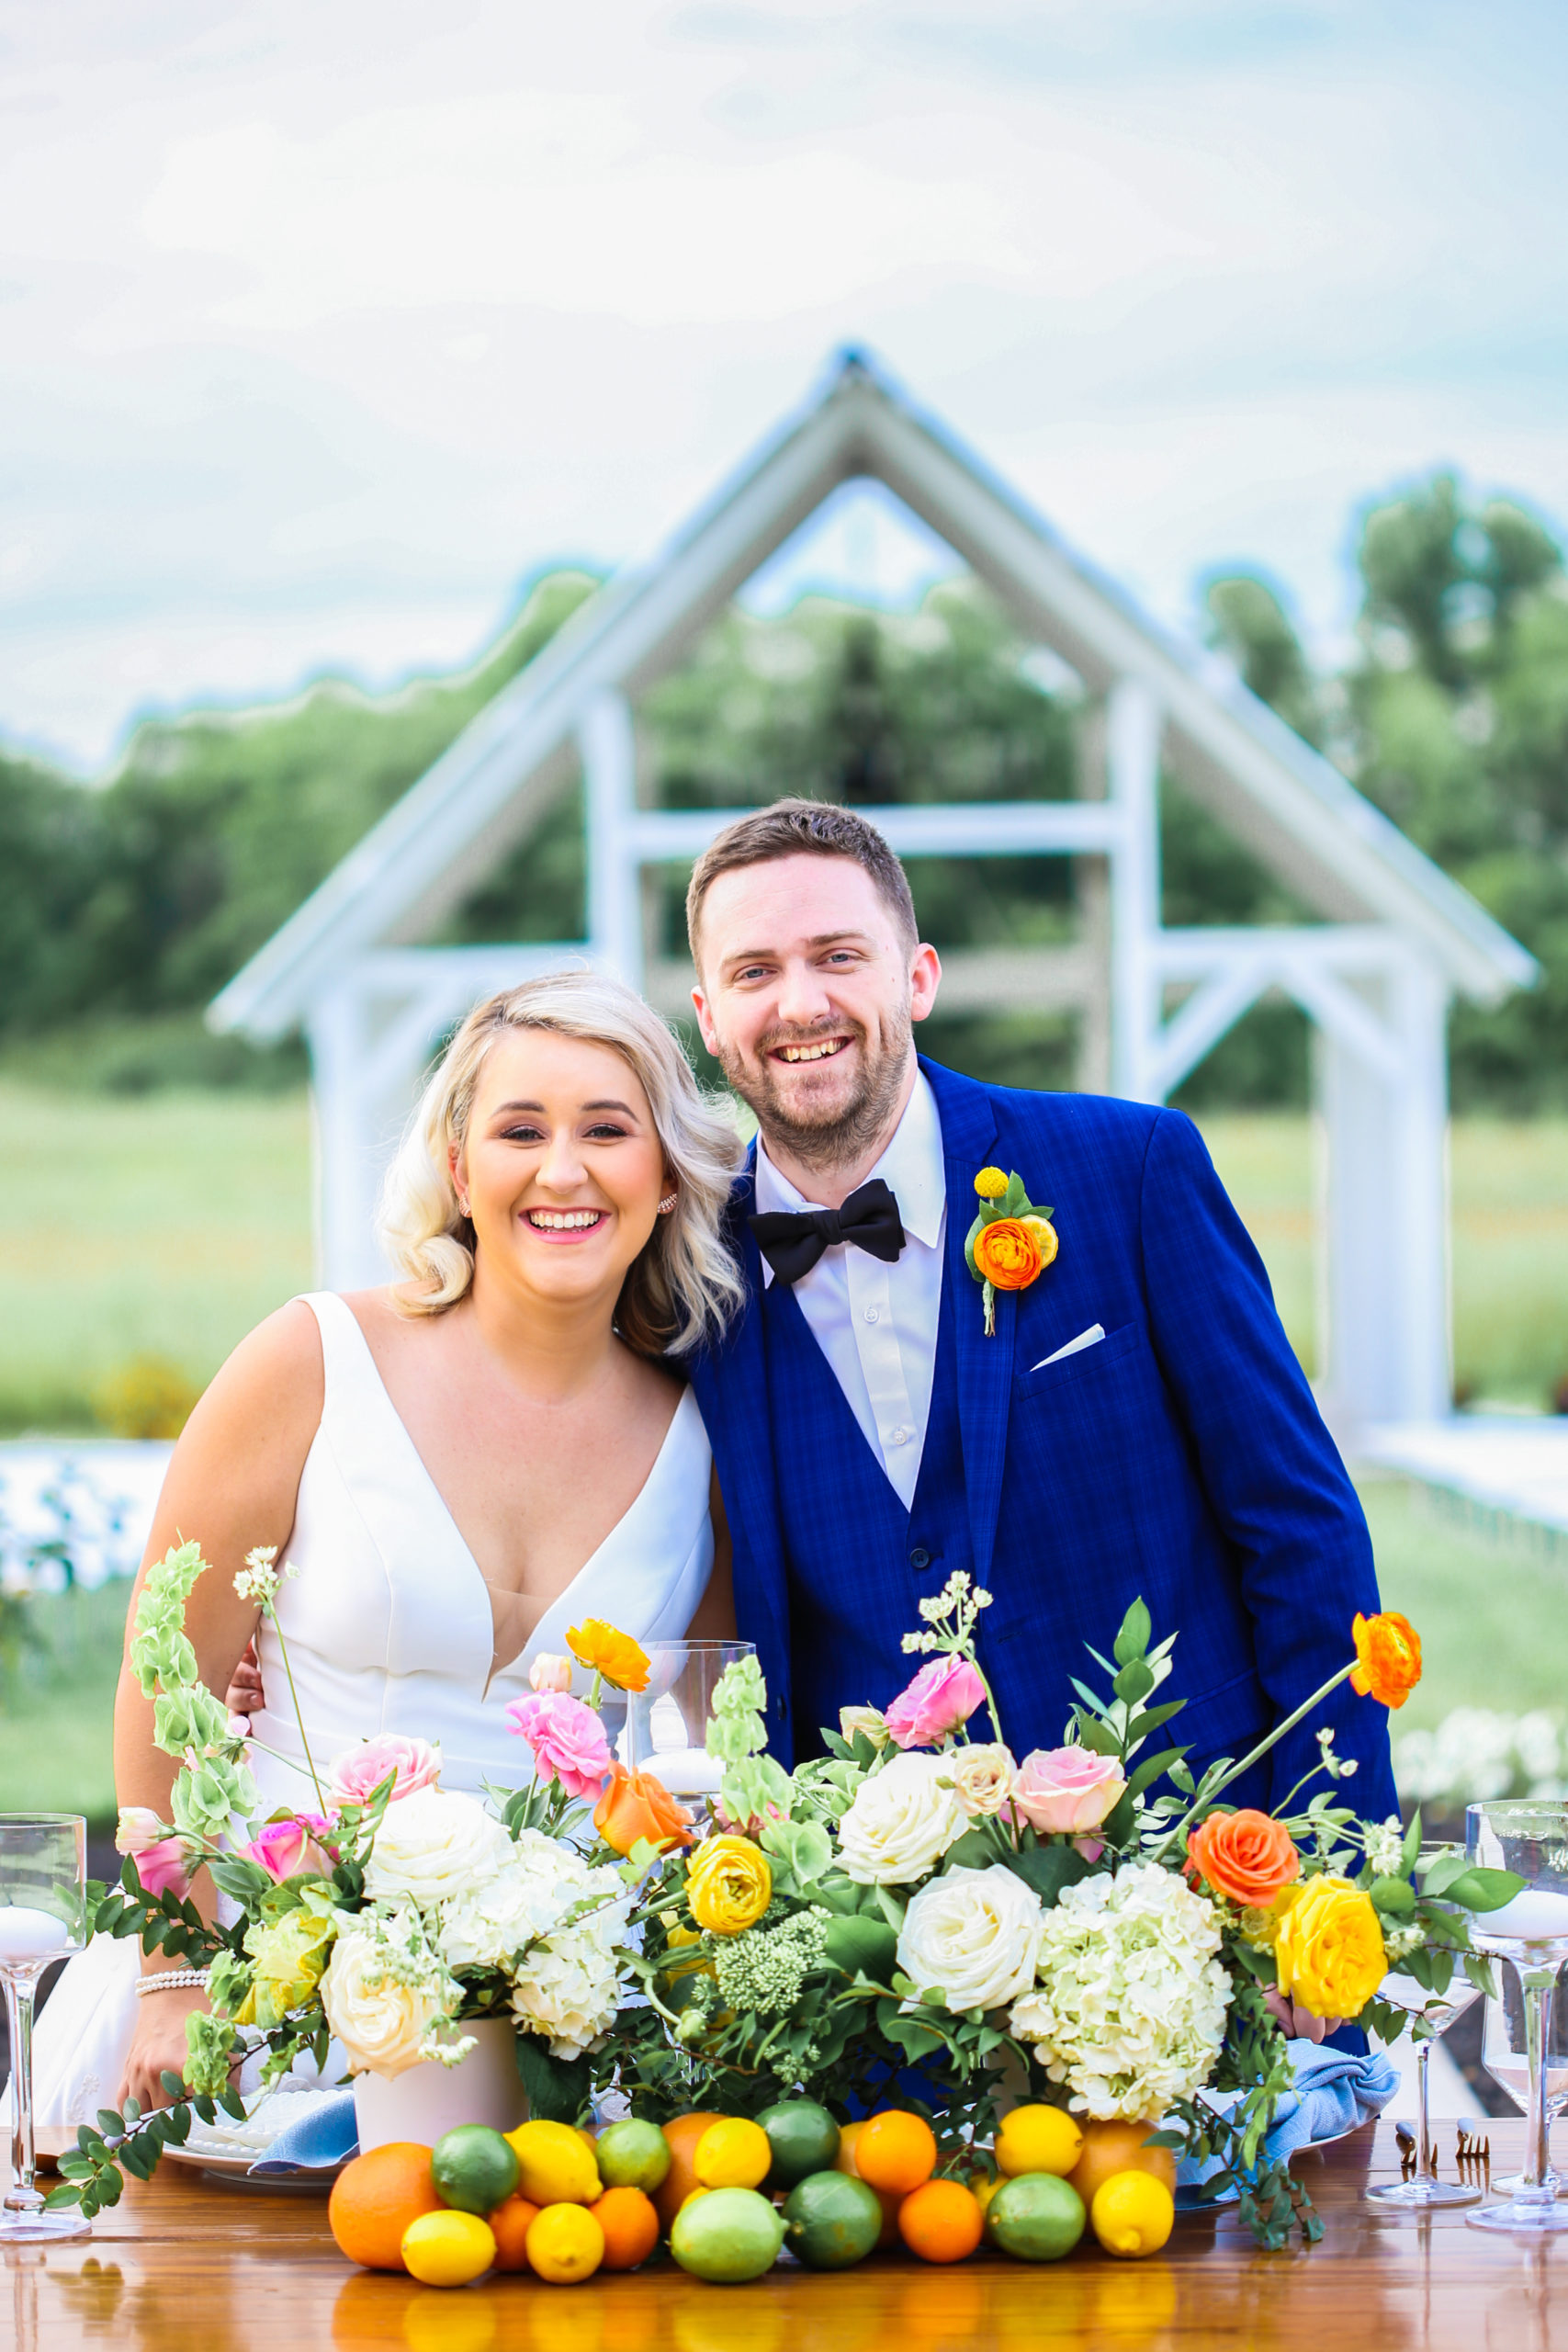 deer ridge estate outdoor summer wedding - colorful bouquet and flowers - bride and groom